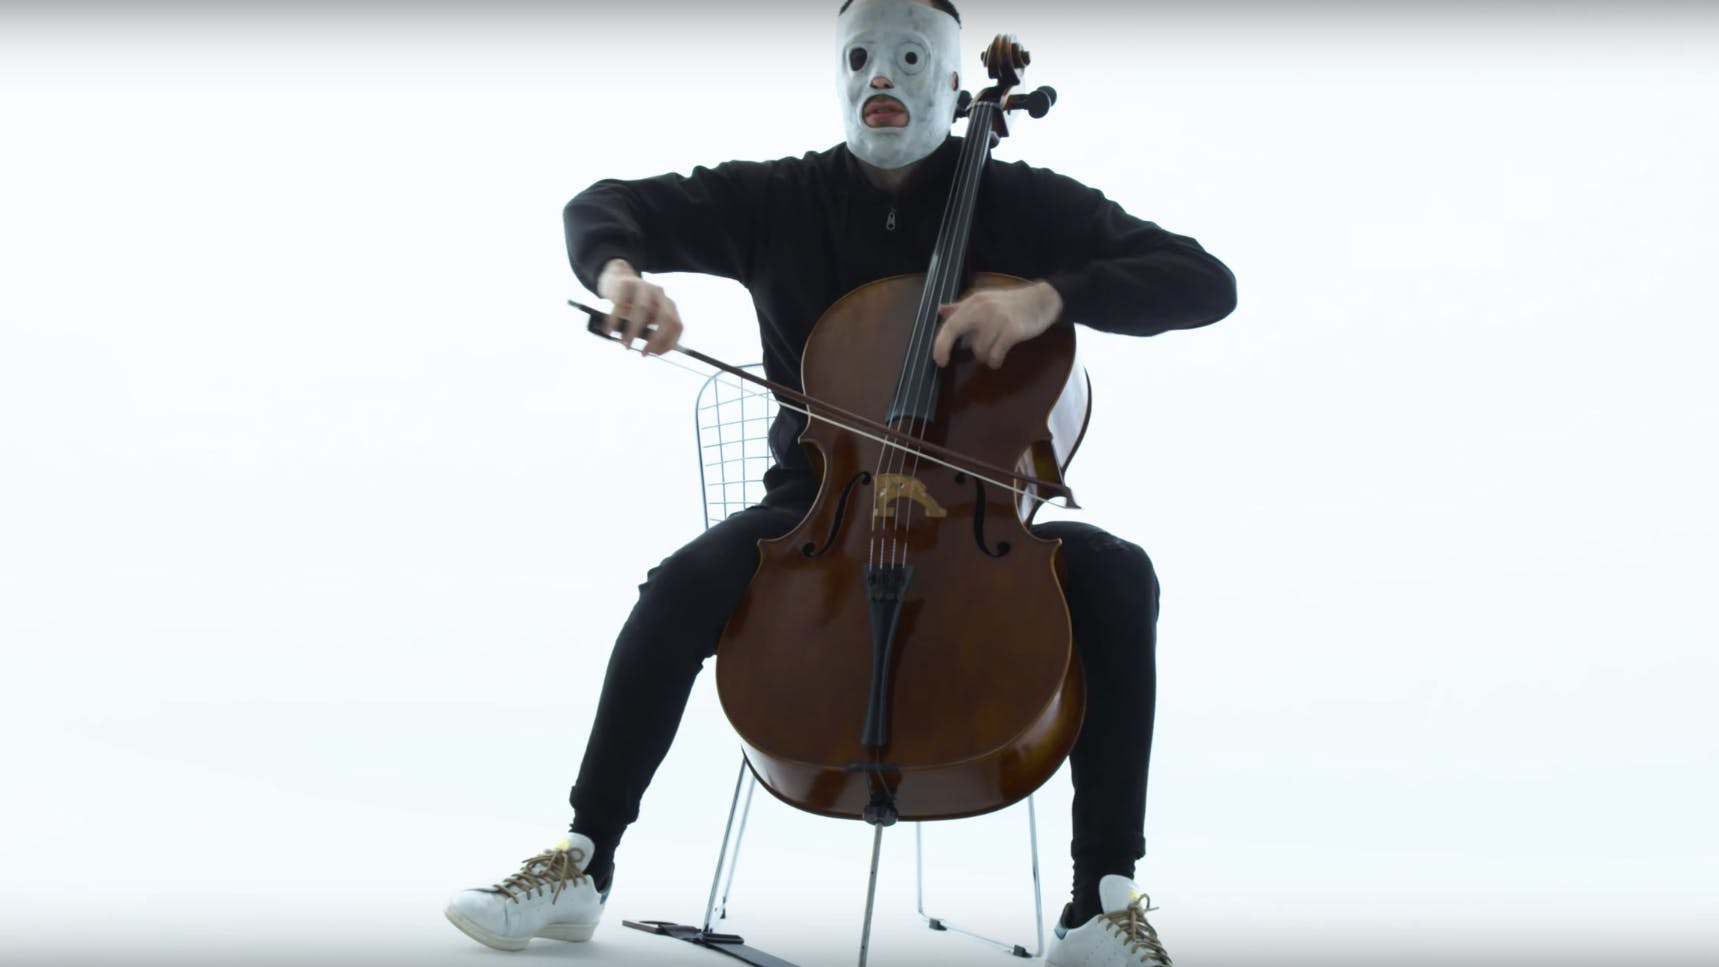 Watch This Masked Cellist Play A Classical Cover Of Slipknot's The Devil In I